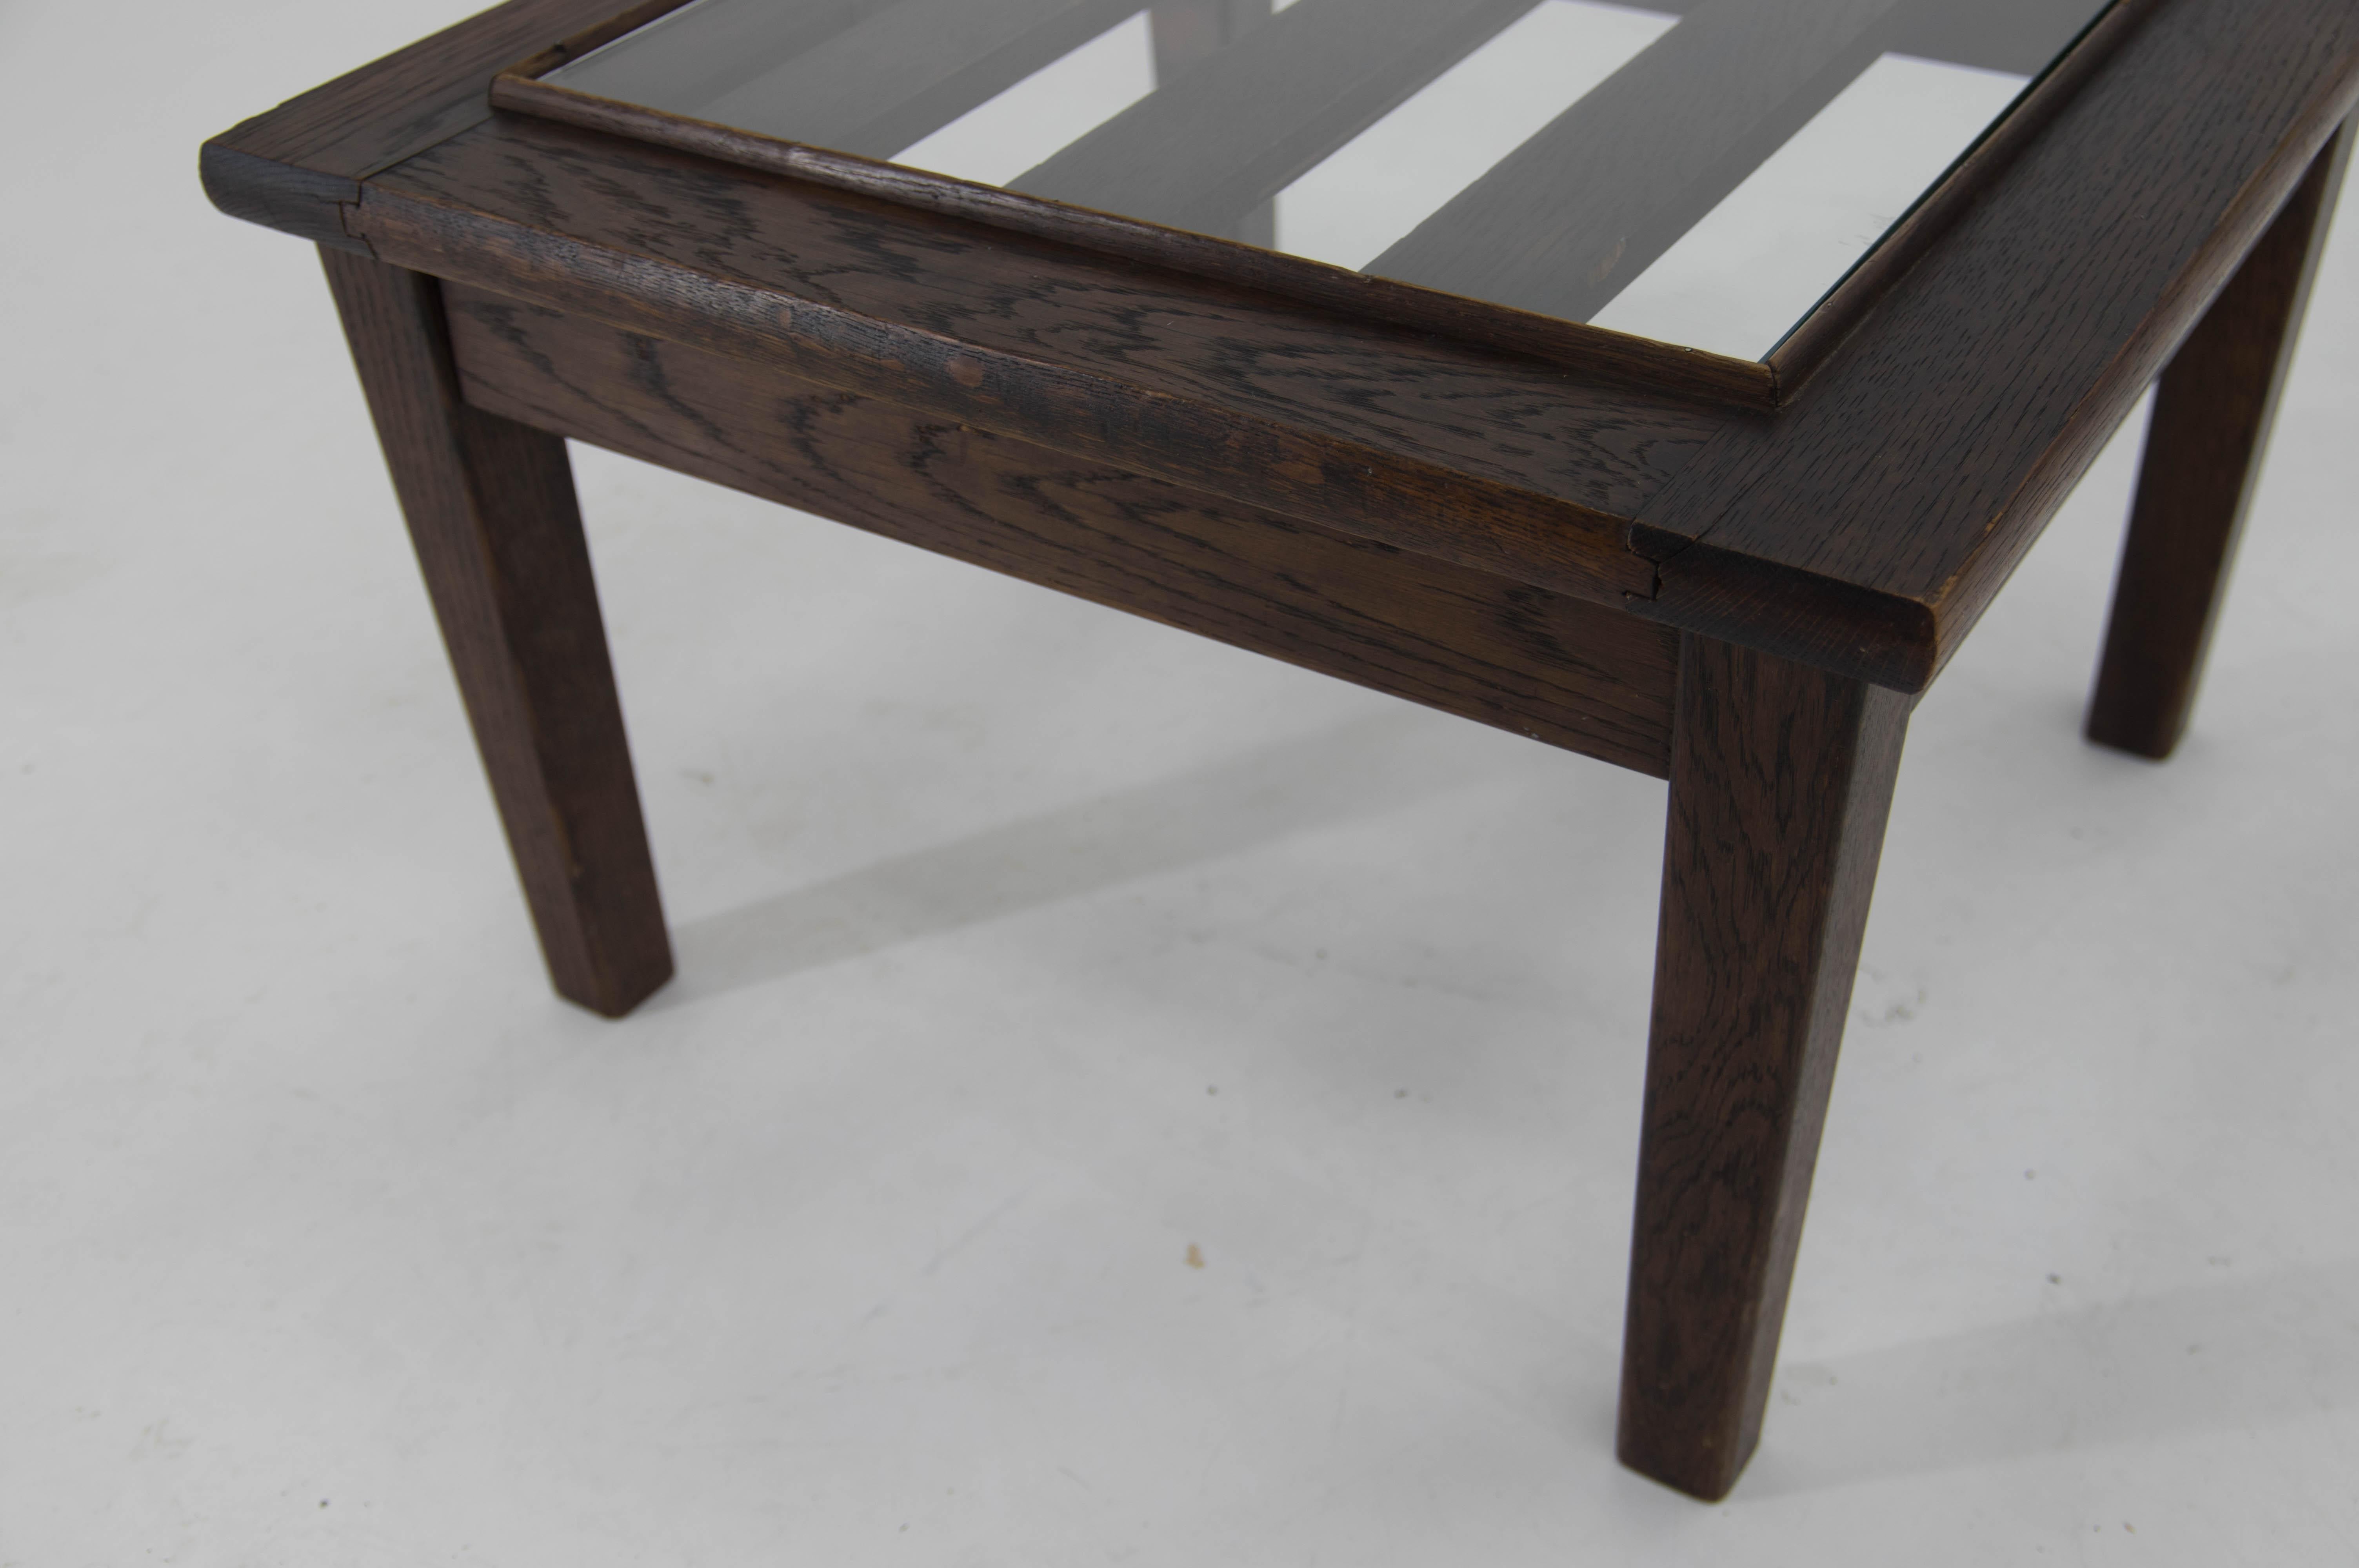 Rare Functionalist Side Table by Antonin Heythum, 1930s For Sale 3